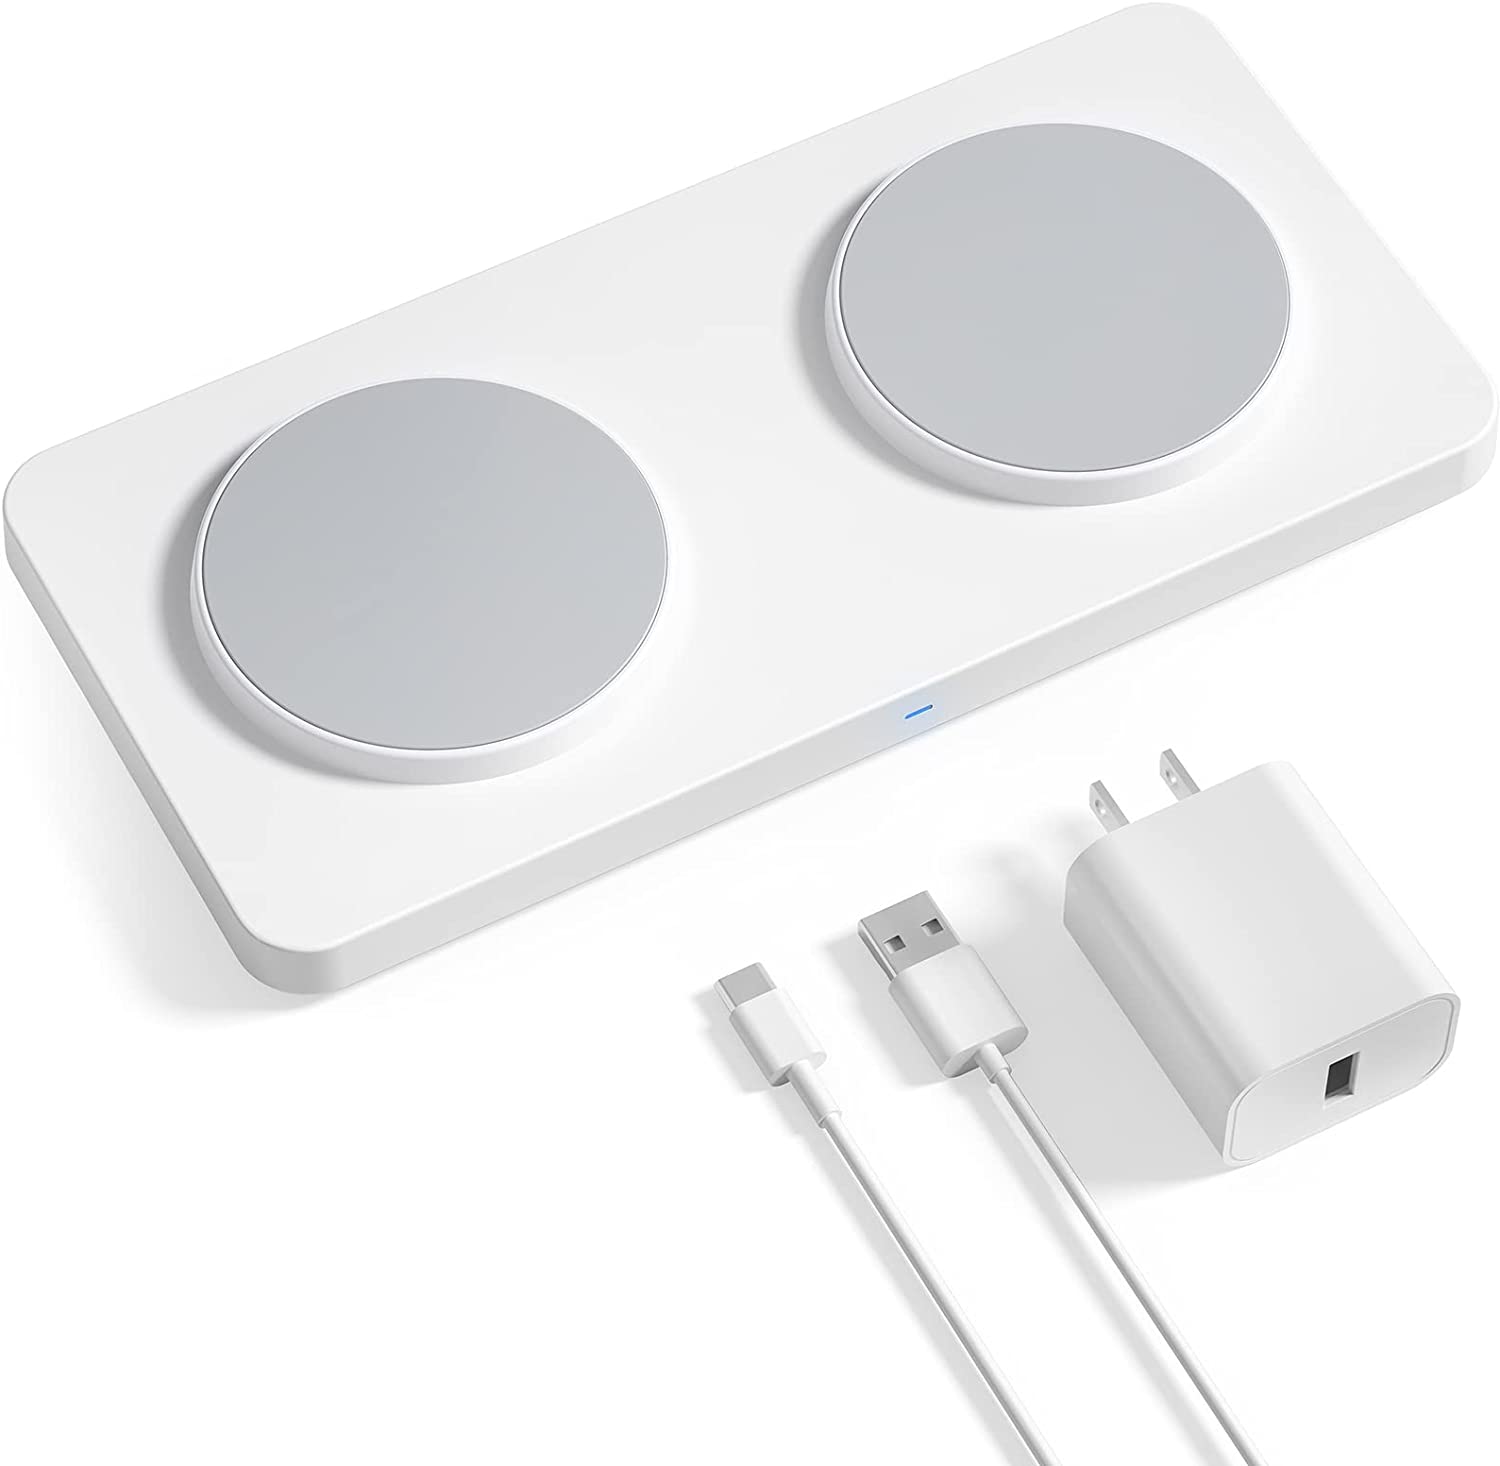 GEEKERA Magnetic Wireless Charging Pad, 2 in 1 Dual MagSafe Charging Station for Apple